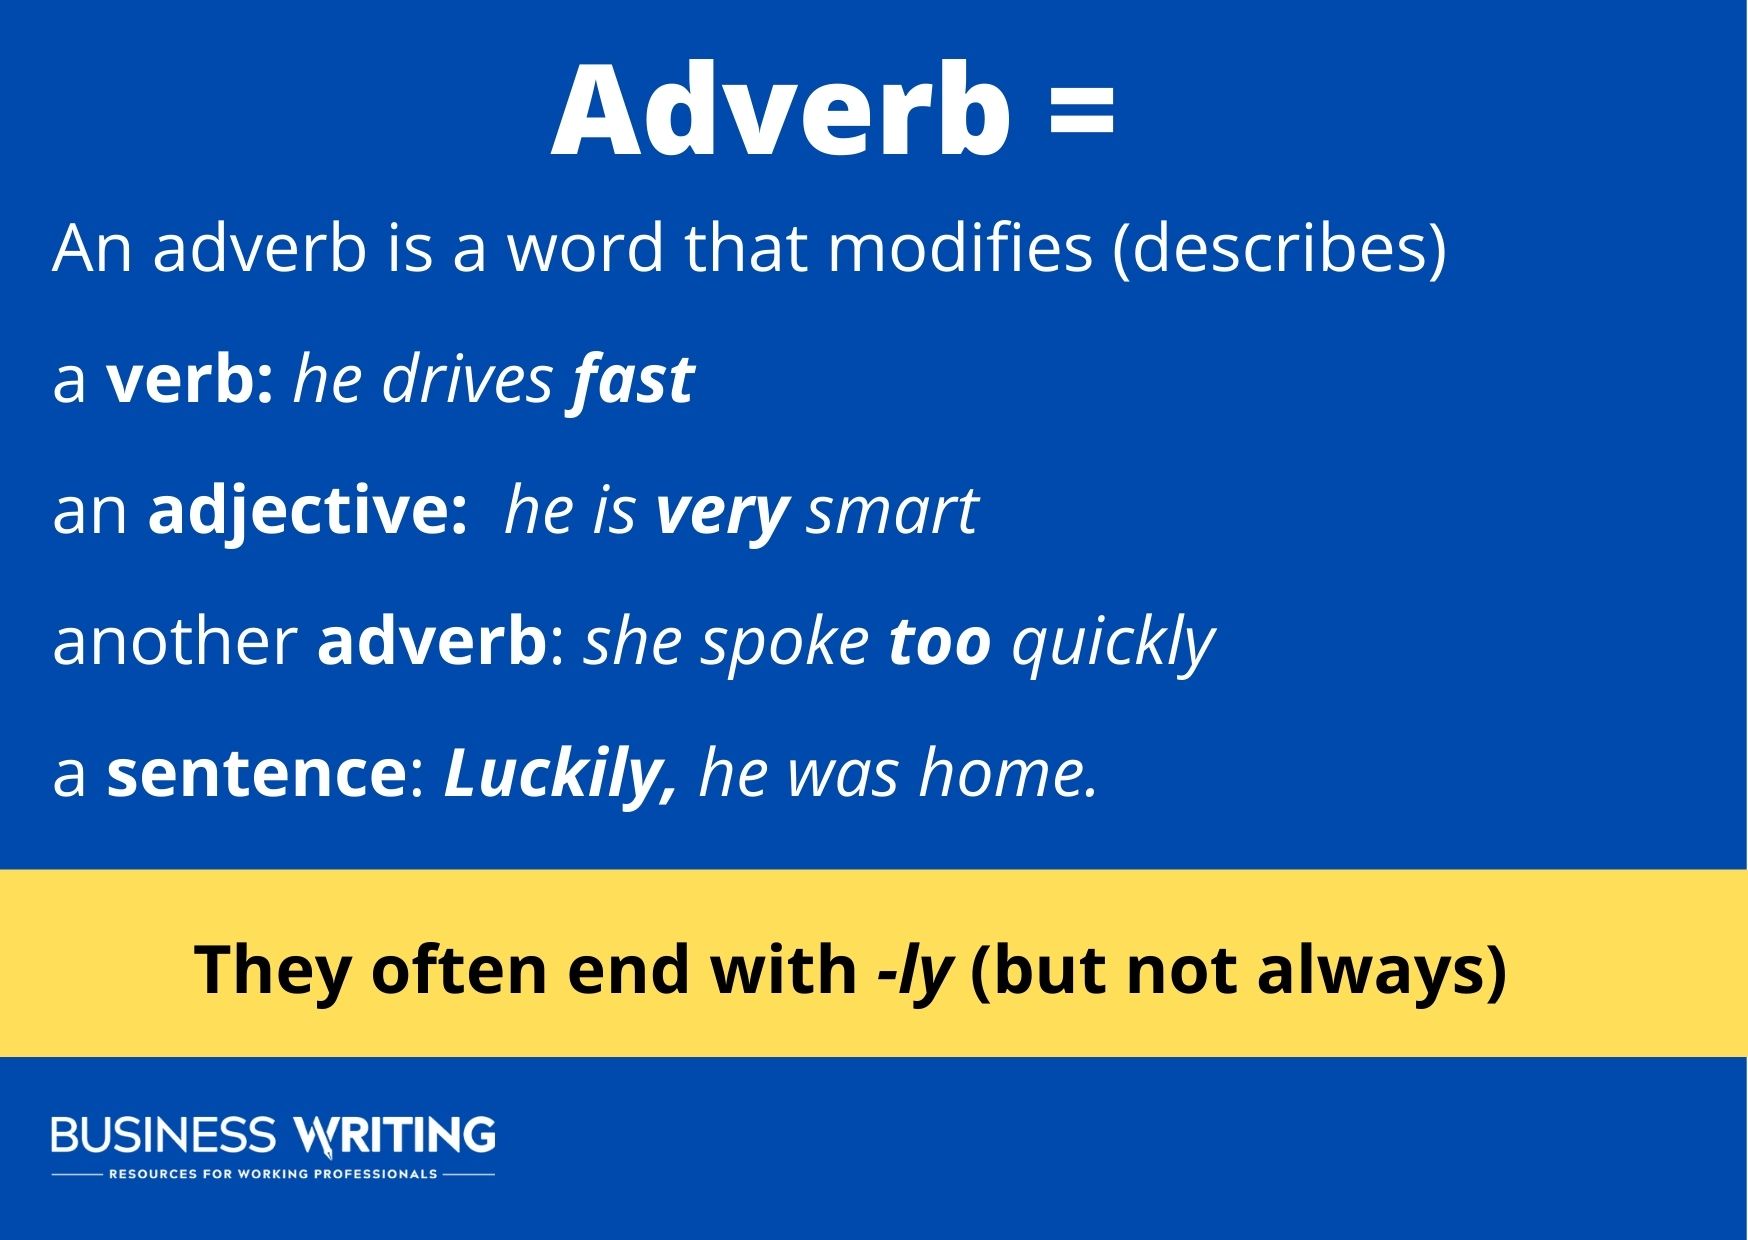 Graphic describing what is an adverb: they modify verbs, adjectives, adverbs and sentences.